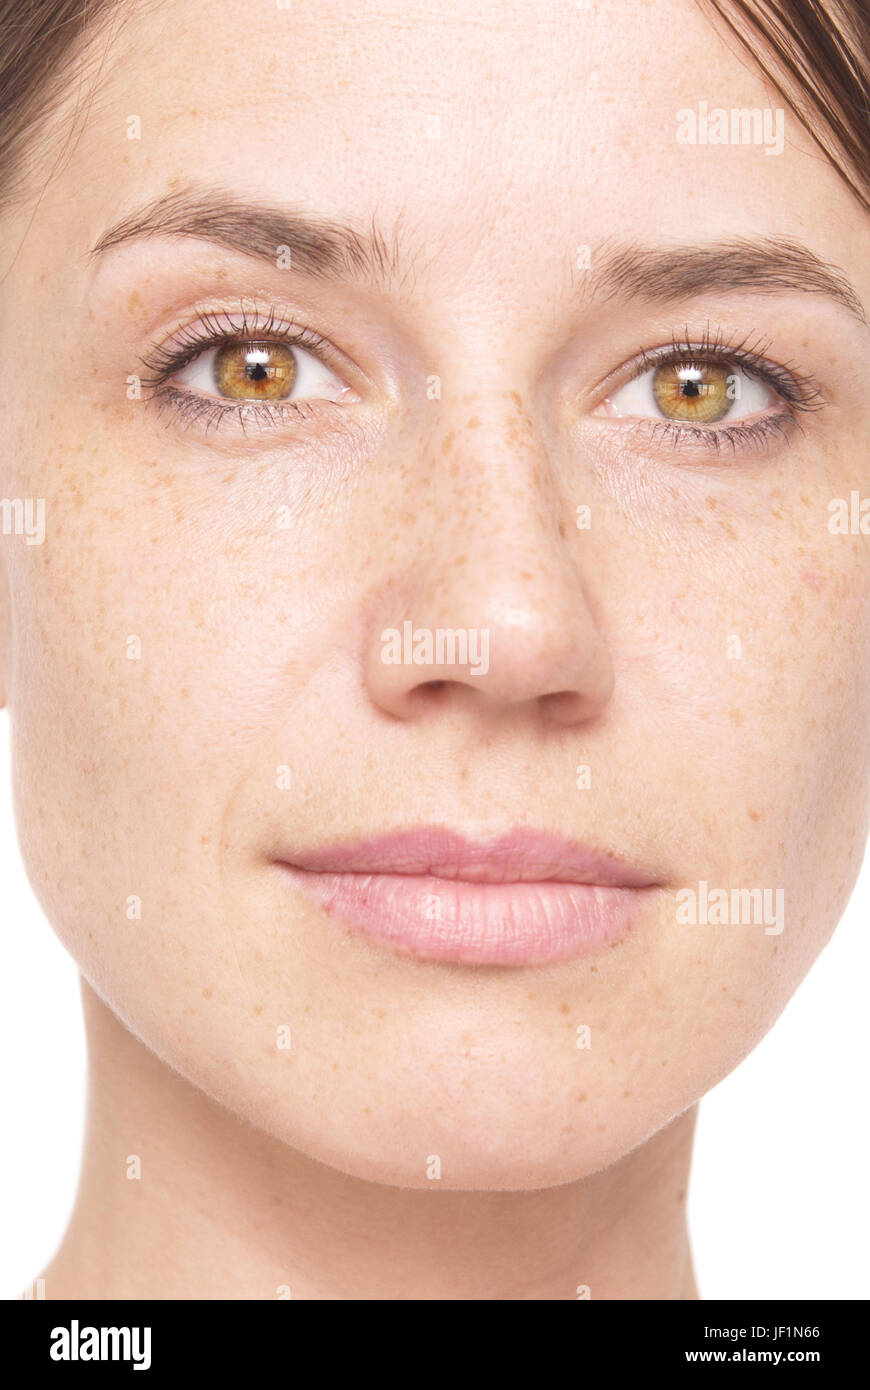 young woman portrait Stock Photo